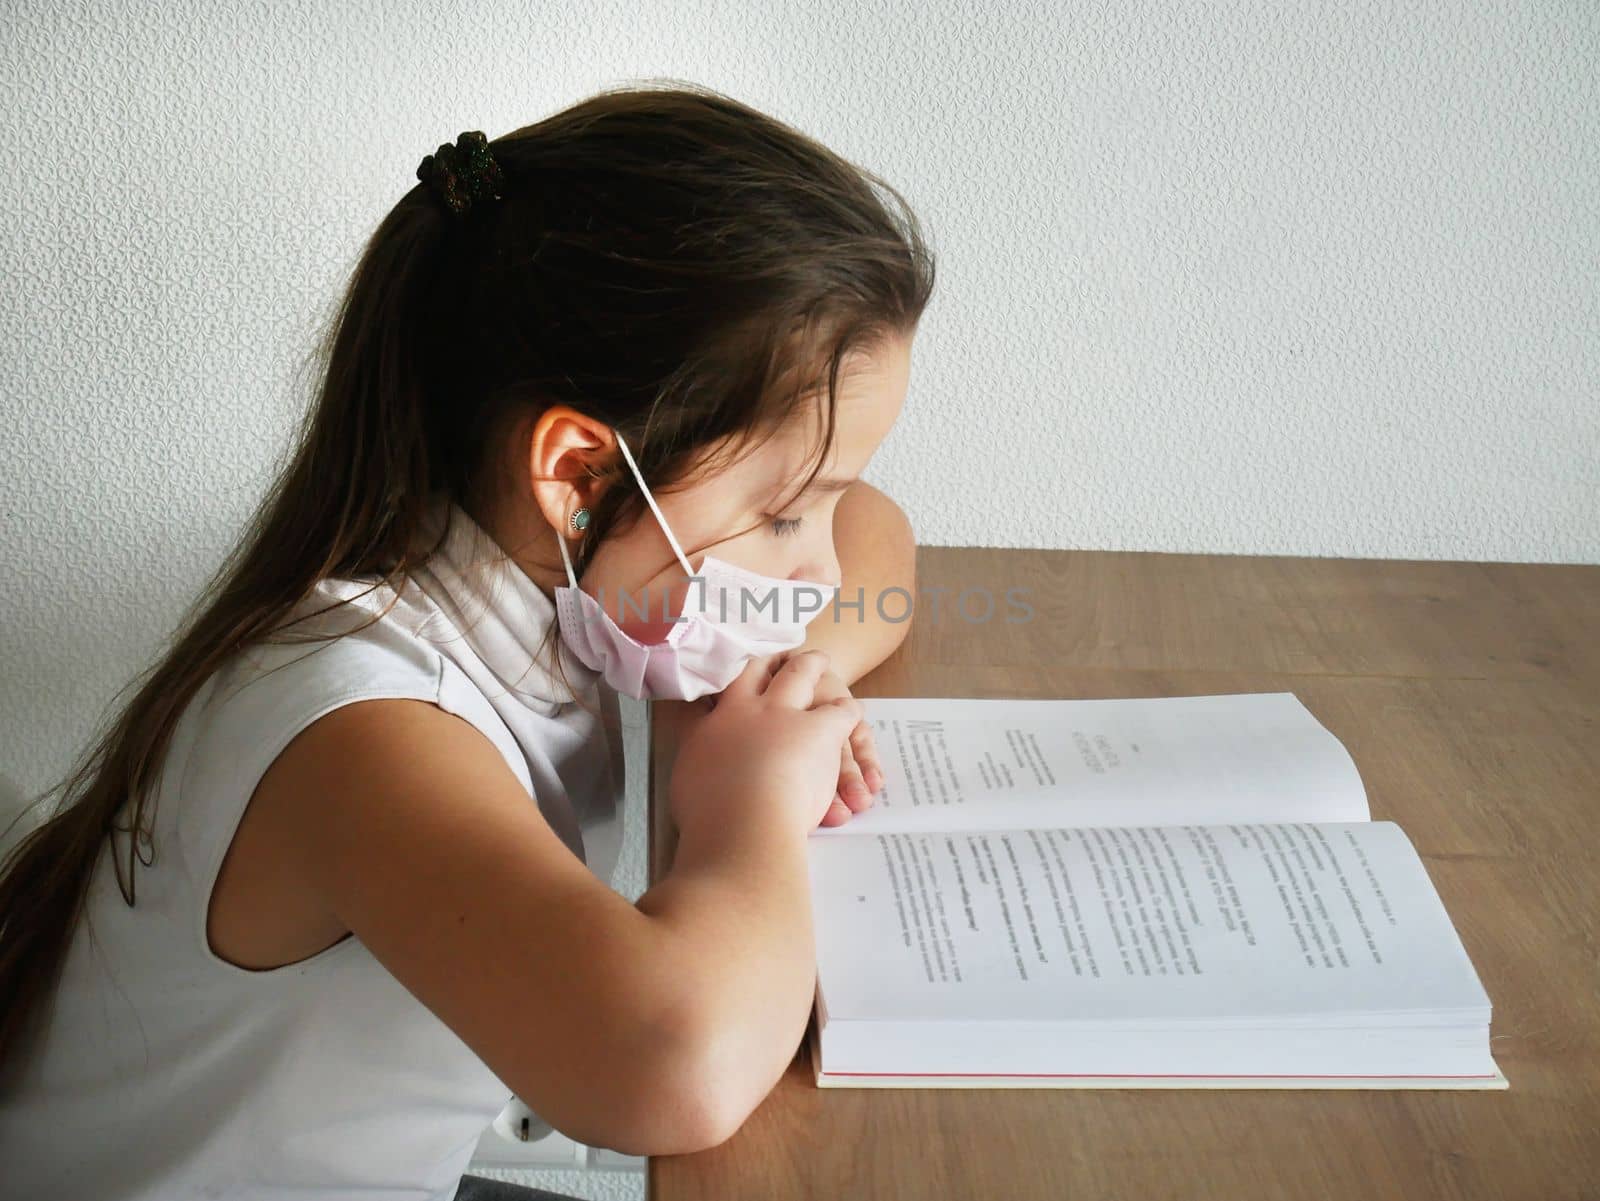 Distance learning online education. Sickness schoolgirl in medical mask studying at home with book doing school homework. Training book on table